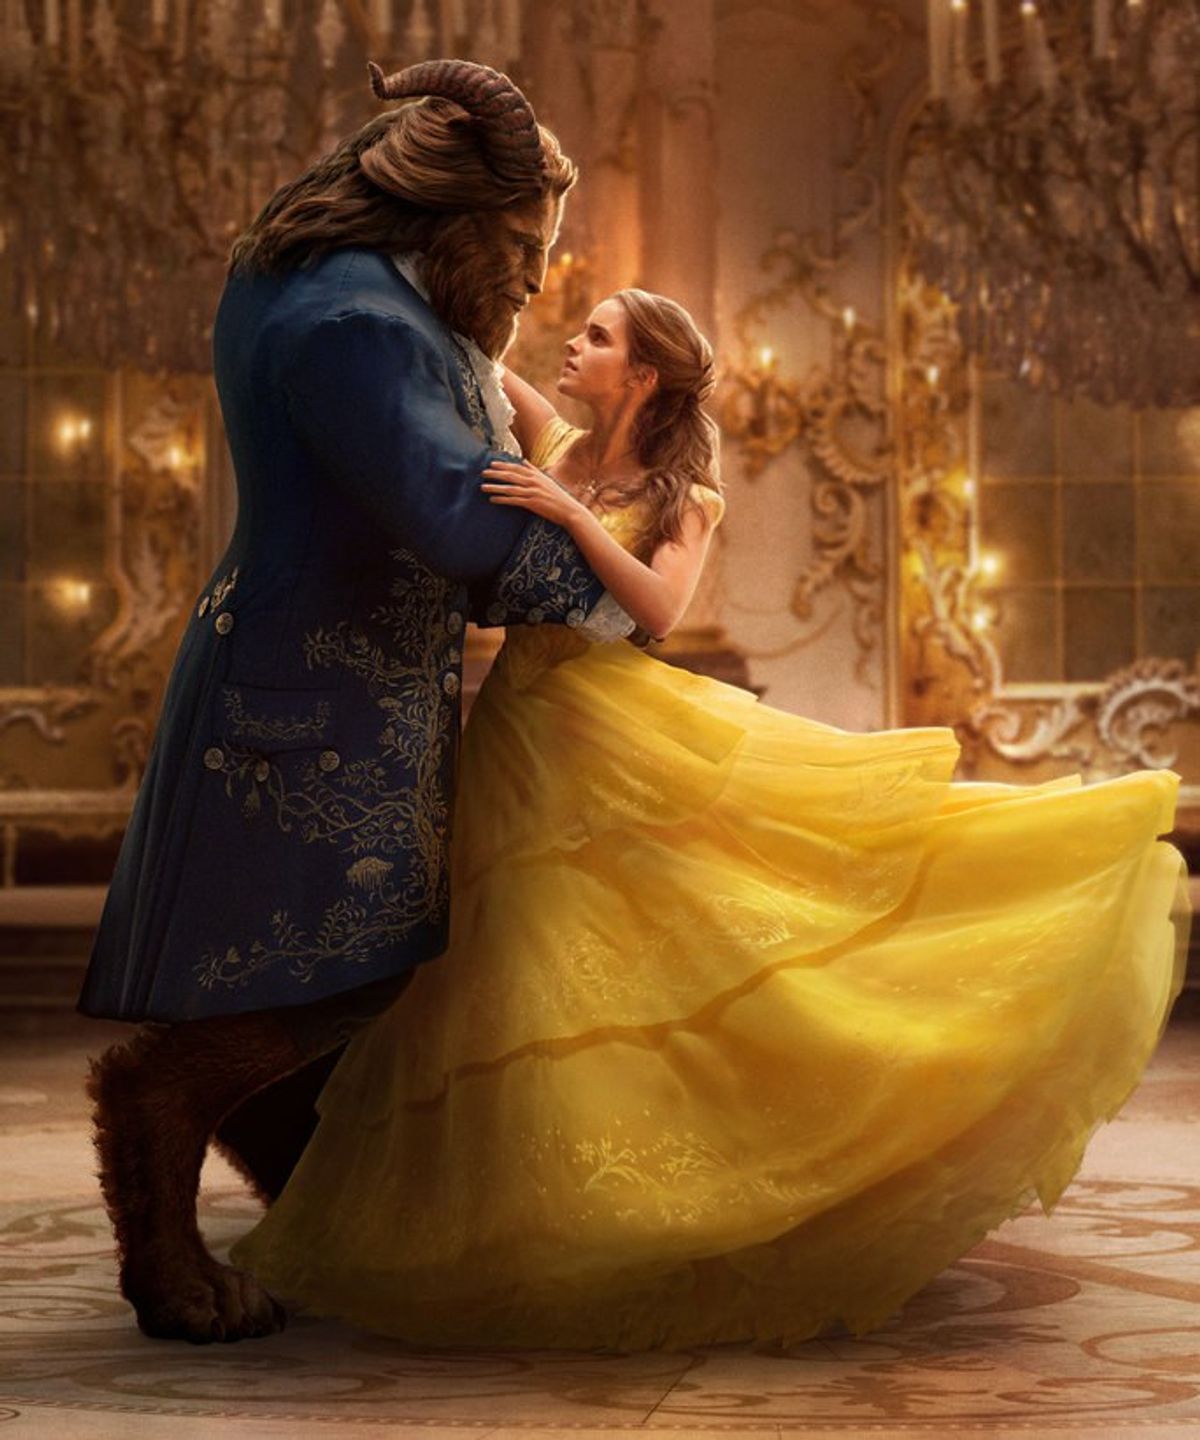 The Beauty And The Beast Trailer: RELEASED